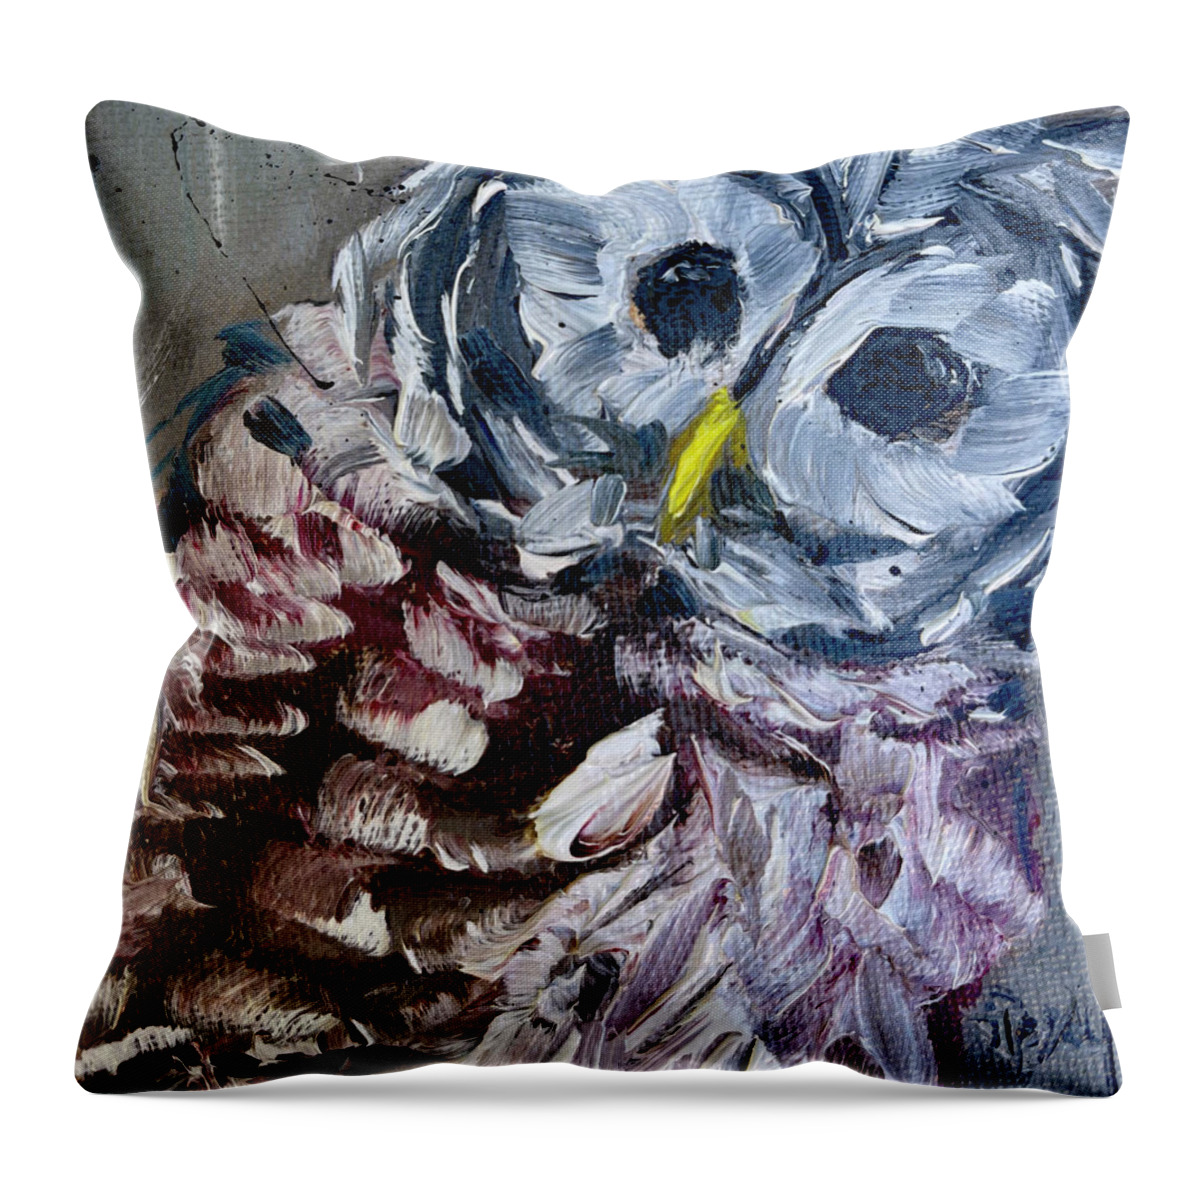 Barred Owl Throw Pillow featuring the painting Baby Barred Owl by Roxy Rich